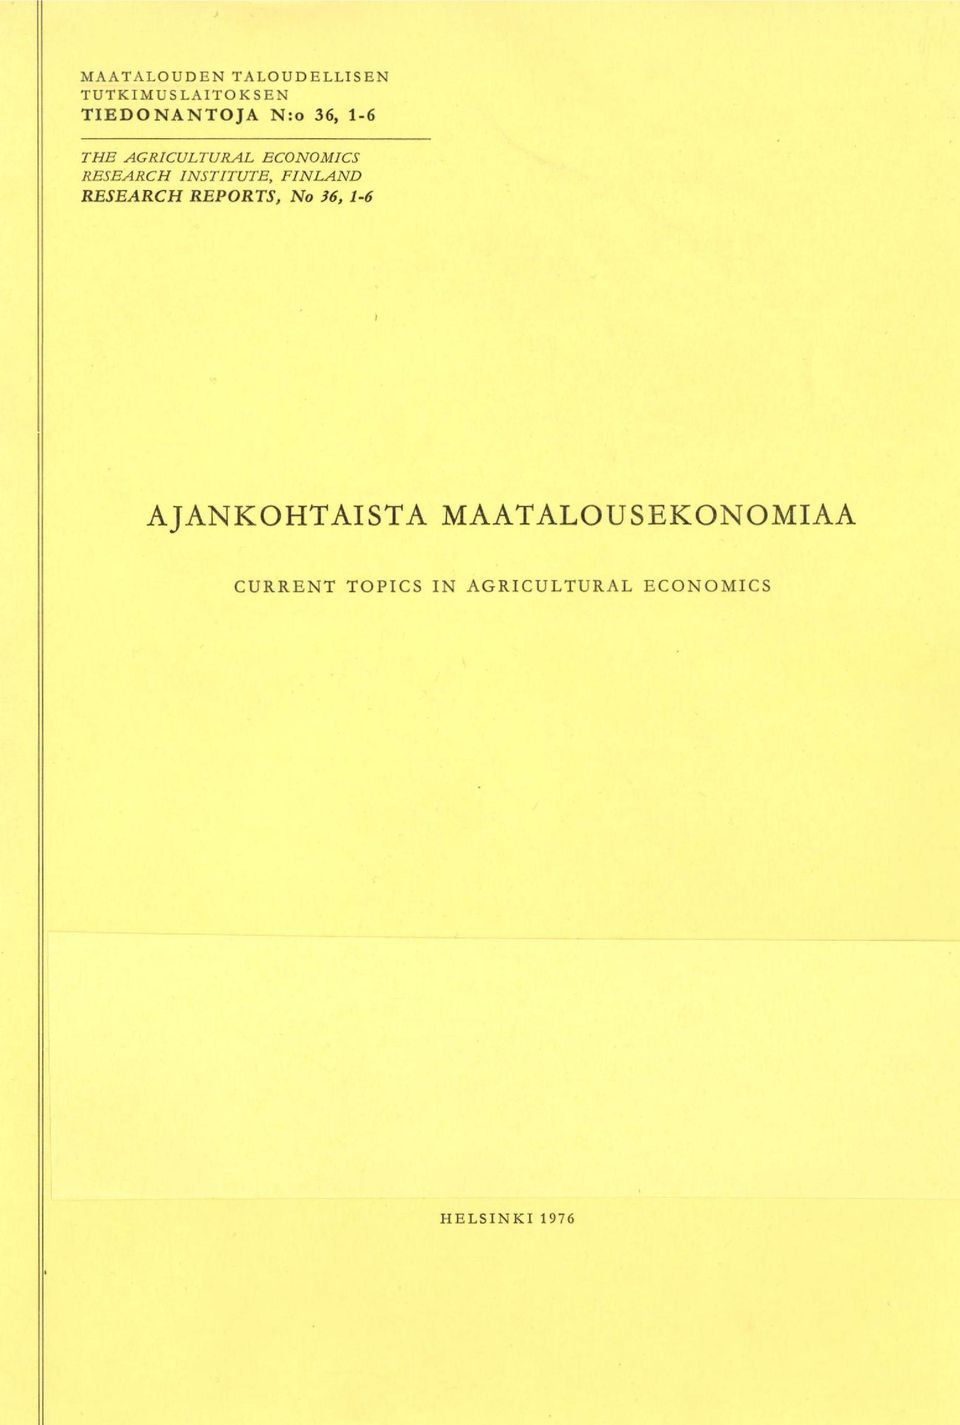 FINLAND RESEARCH REPORTS, No 36, 1-6 AJANKOHTAISTA